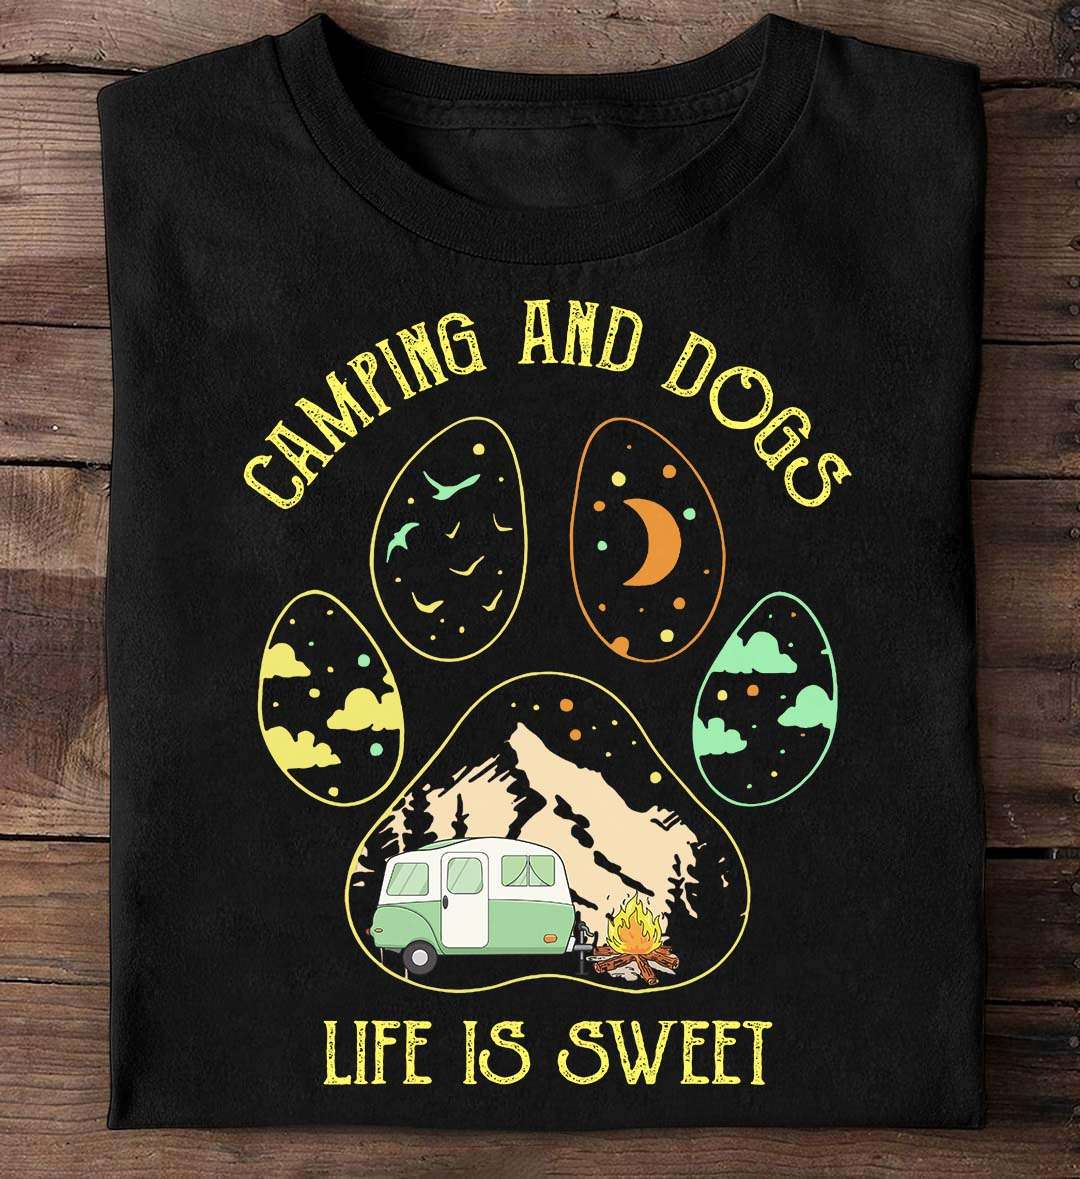 Dog's footprint, Camping on the mountain - Camping and dogs life is sweet